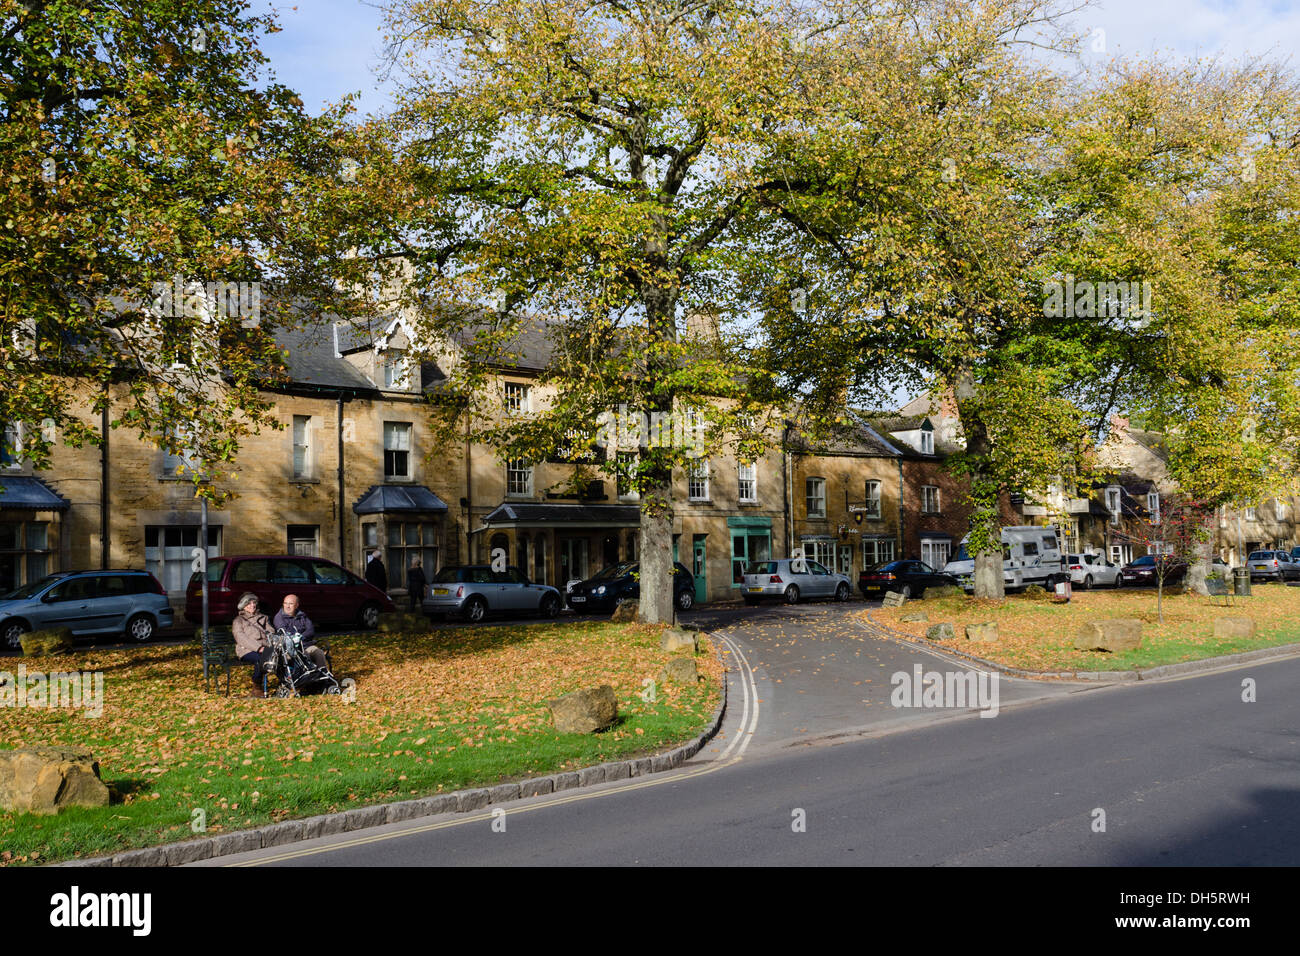 Couple sitting on a bench in front of a row of shops Moreton-in-Marsh High Street in the Cotswolds Stock Photo